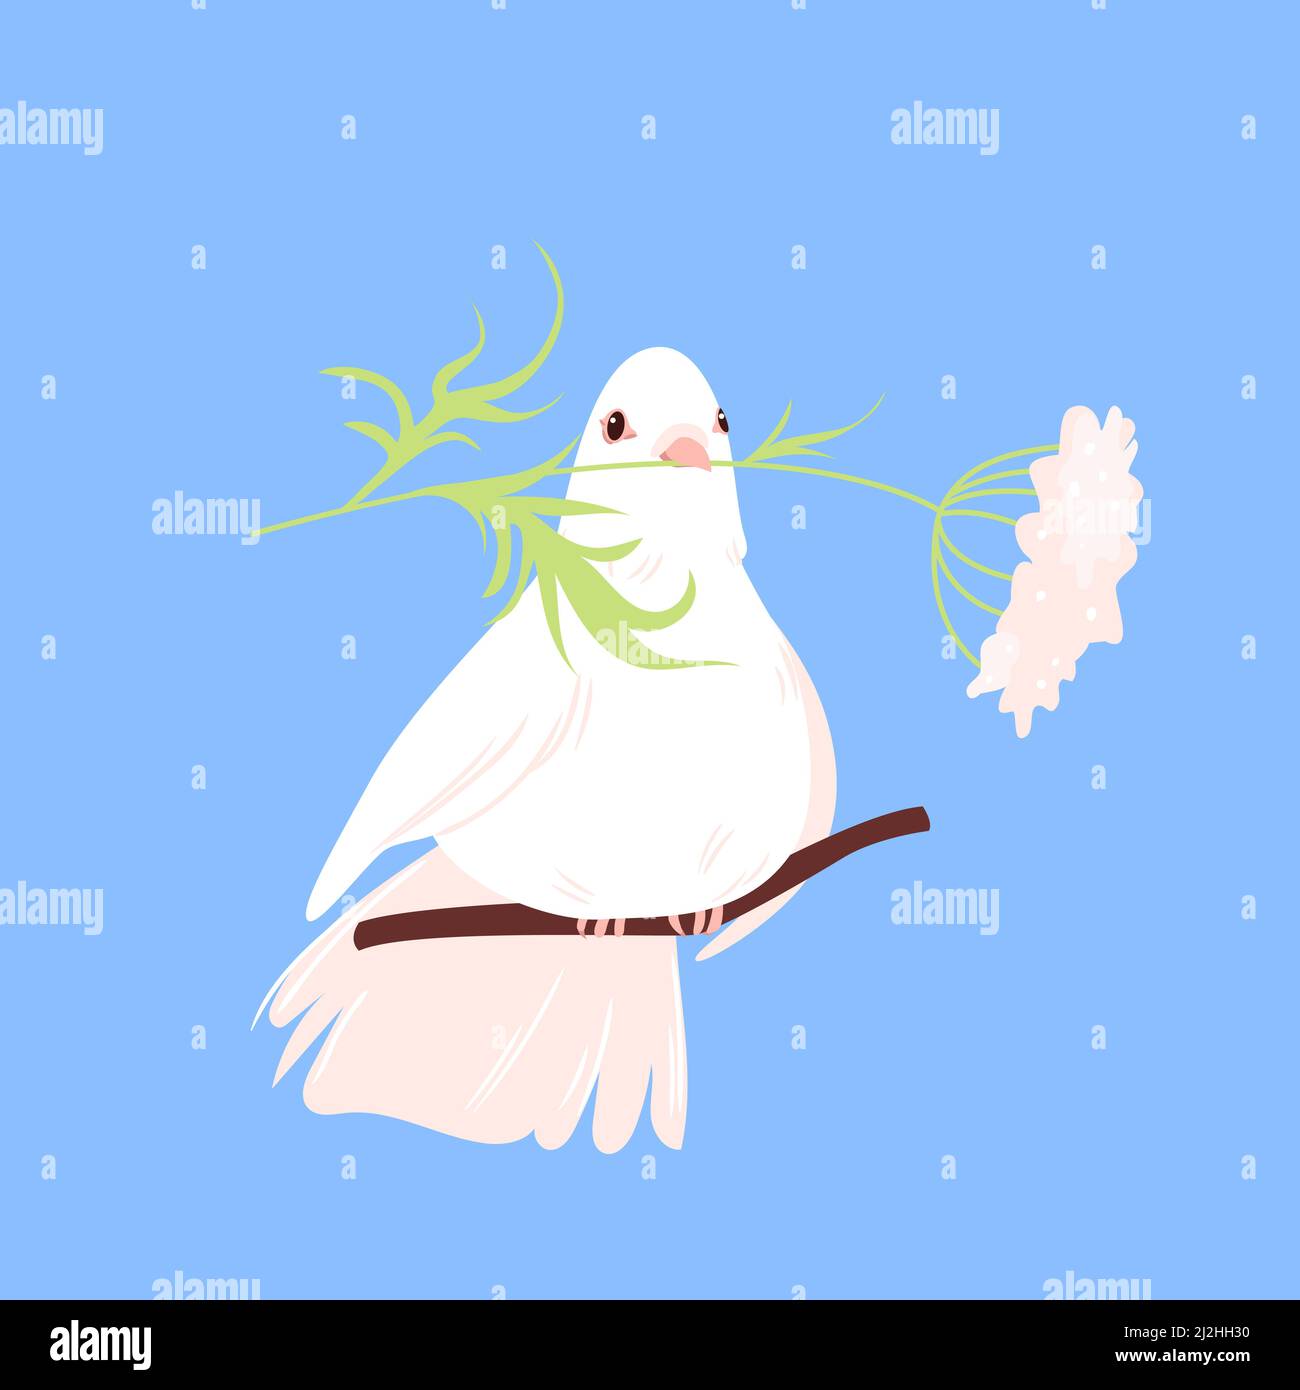 Pigeon peace bird holding plant branch Stock Vector